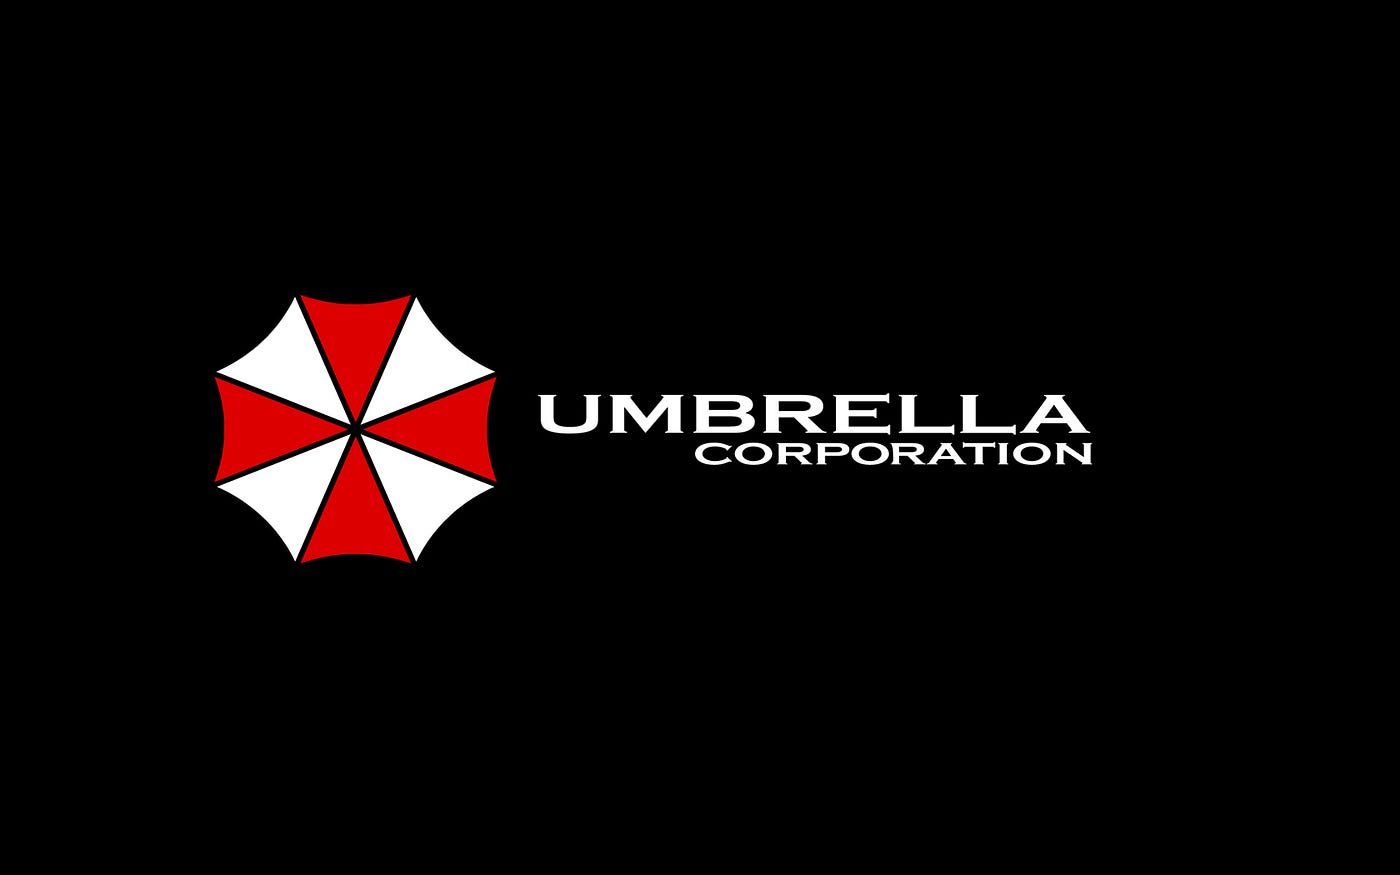 Umbrella Corporation to Reopen, Bring Jobs to the USA